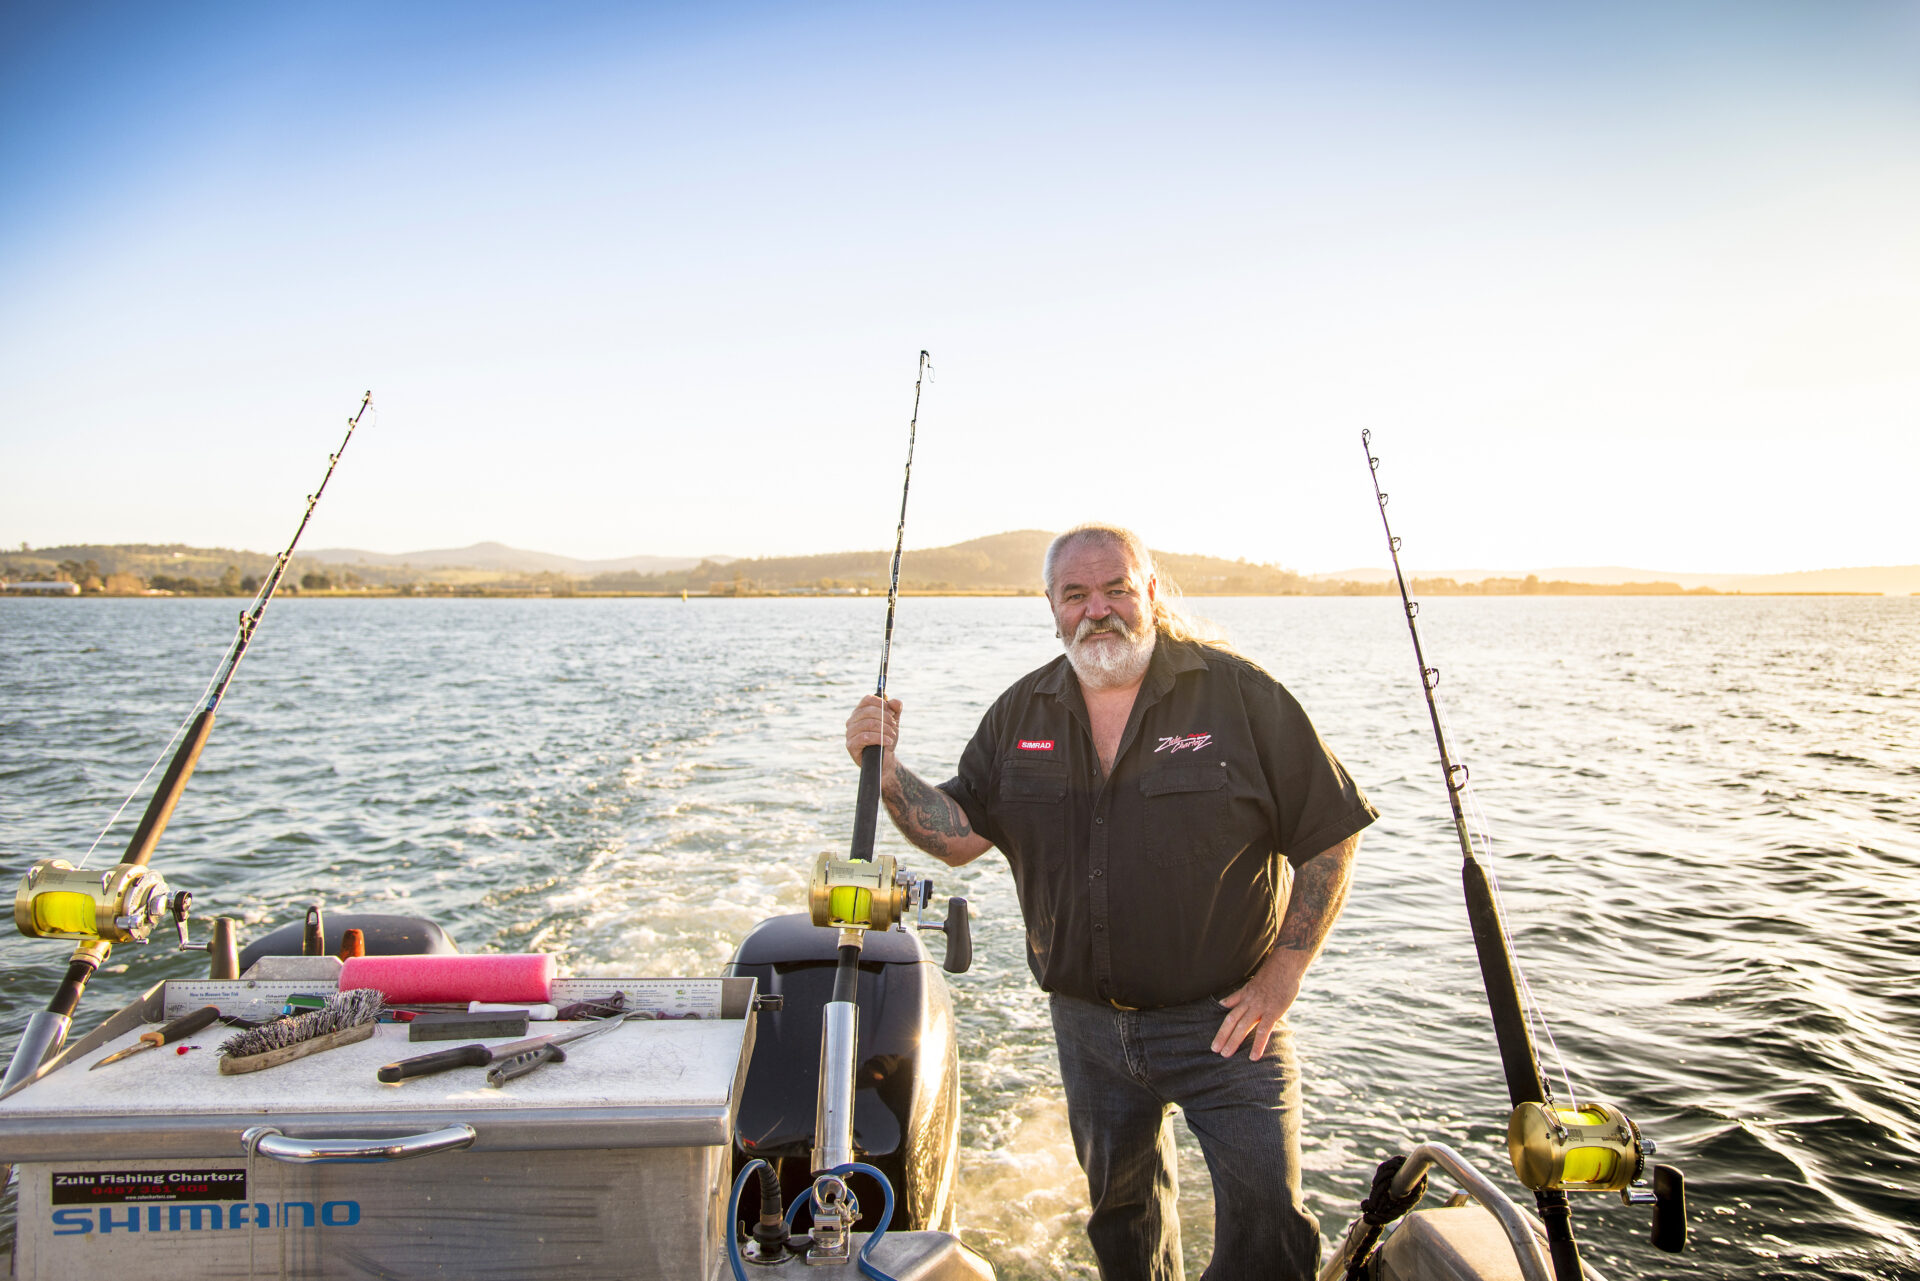 Zulu Fishing Charterz provides professional half and full day fishing trips around the East Coast of Tasmania.